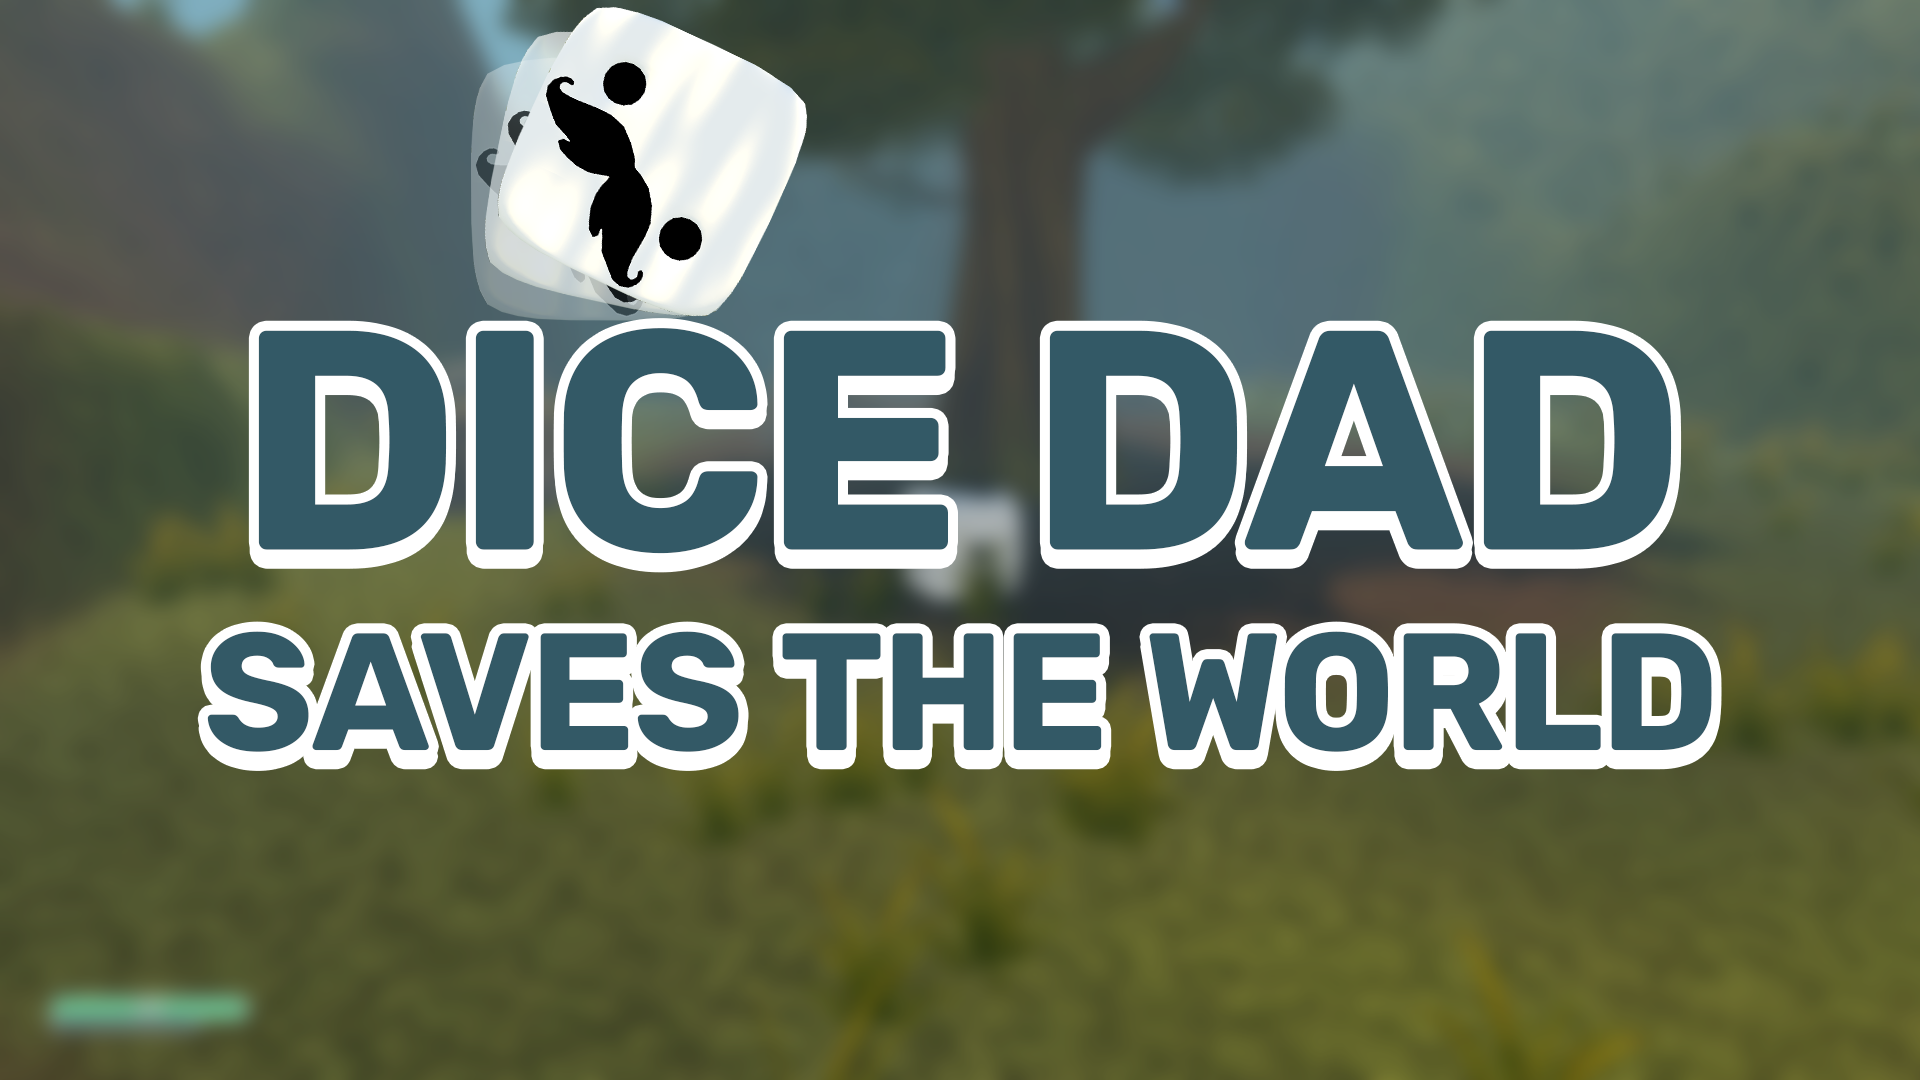 Dice dad saves the world